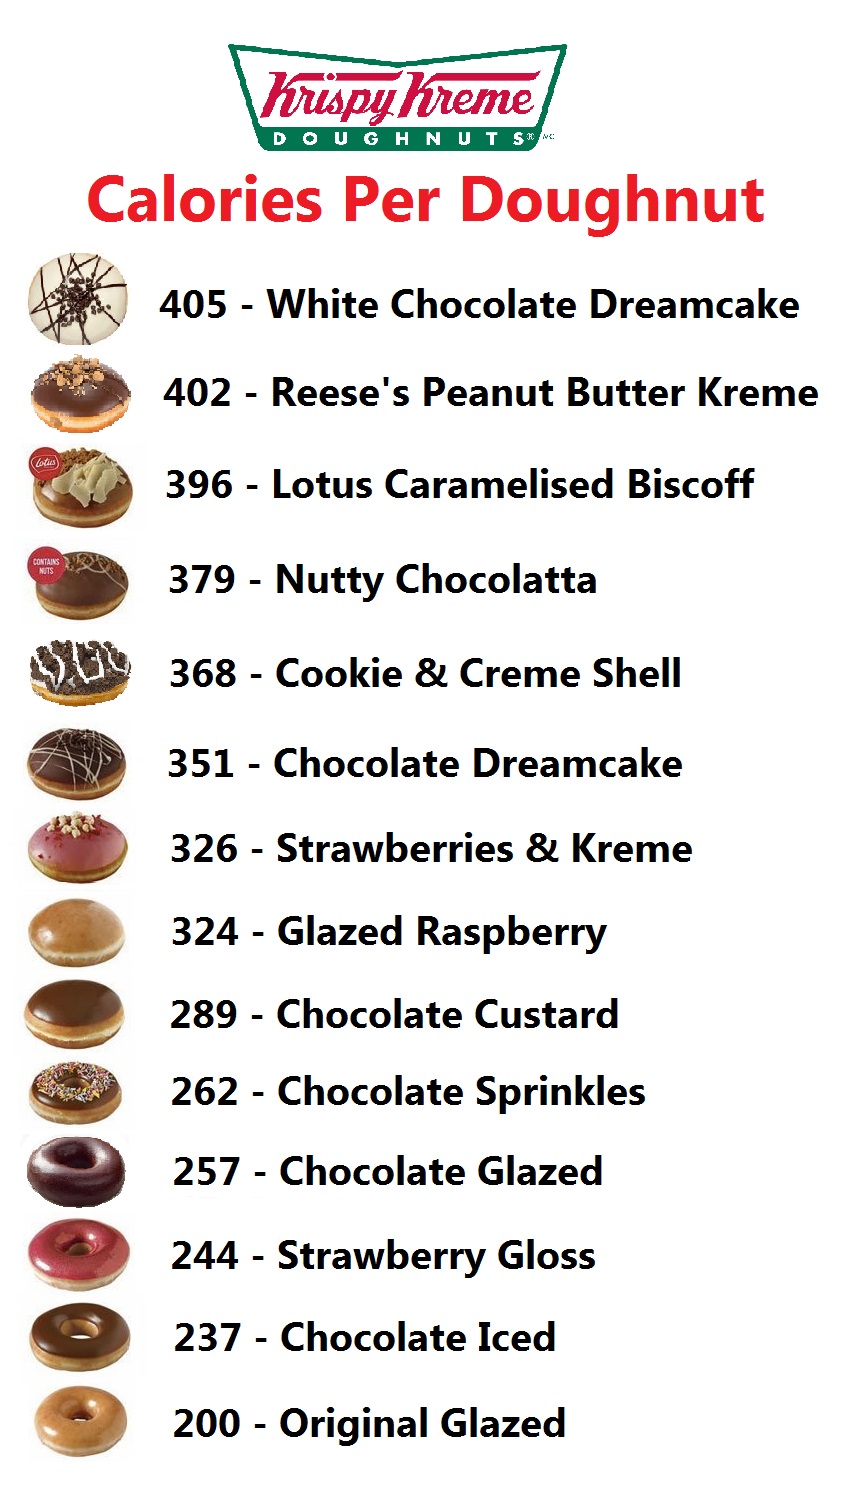 how many calories are in a donut